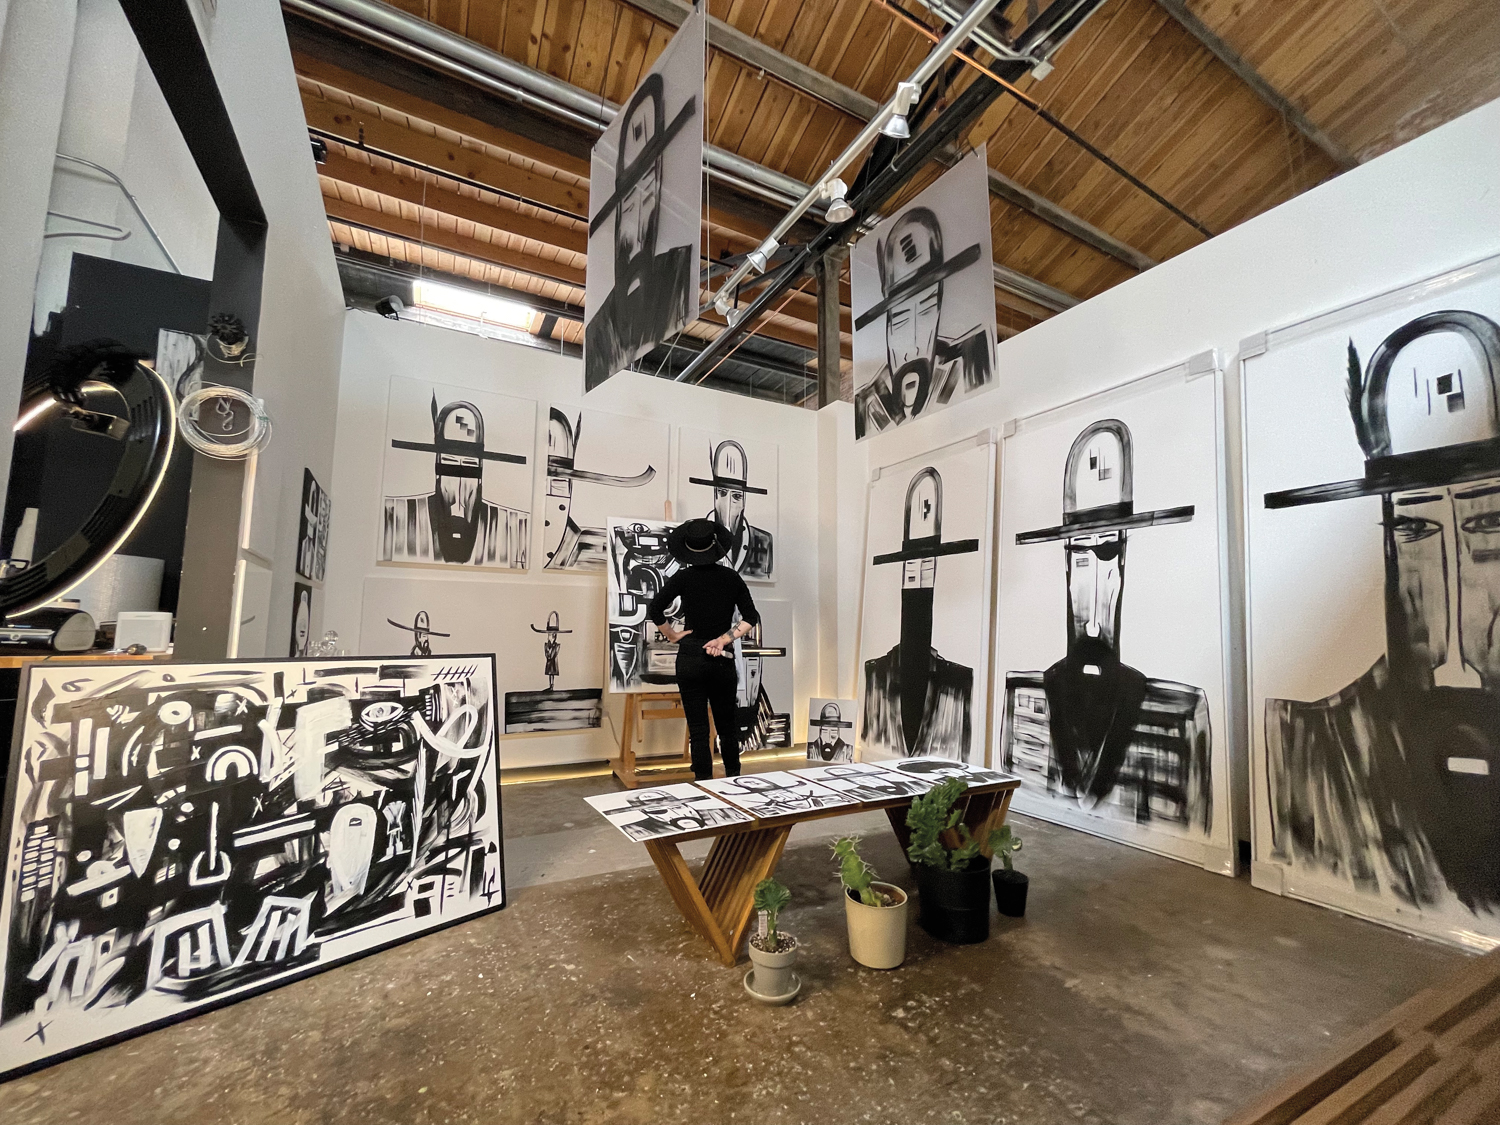 Artist in studio surrounded by paintings of cowboys